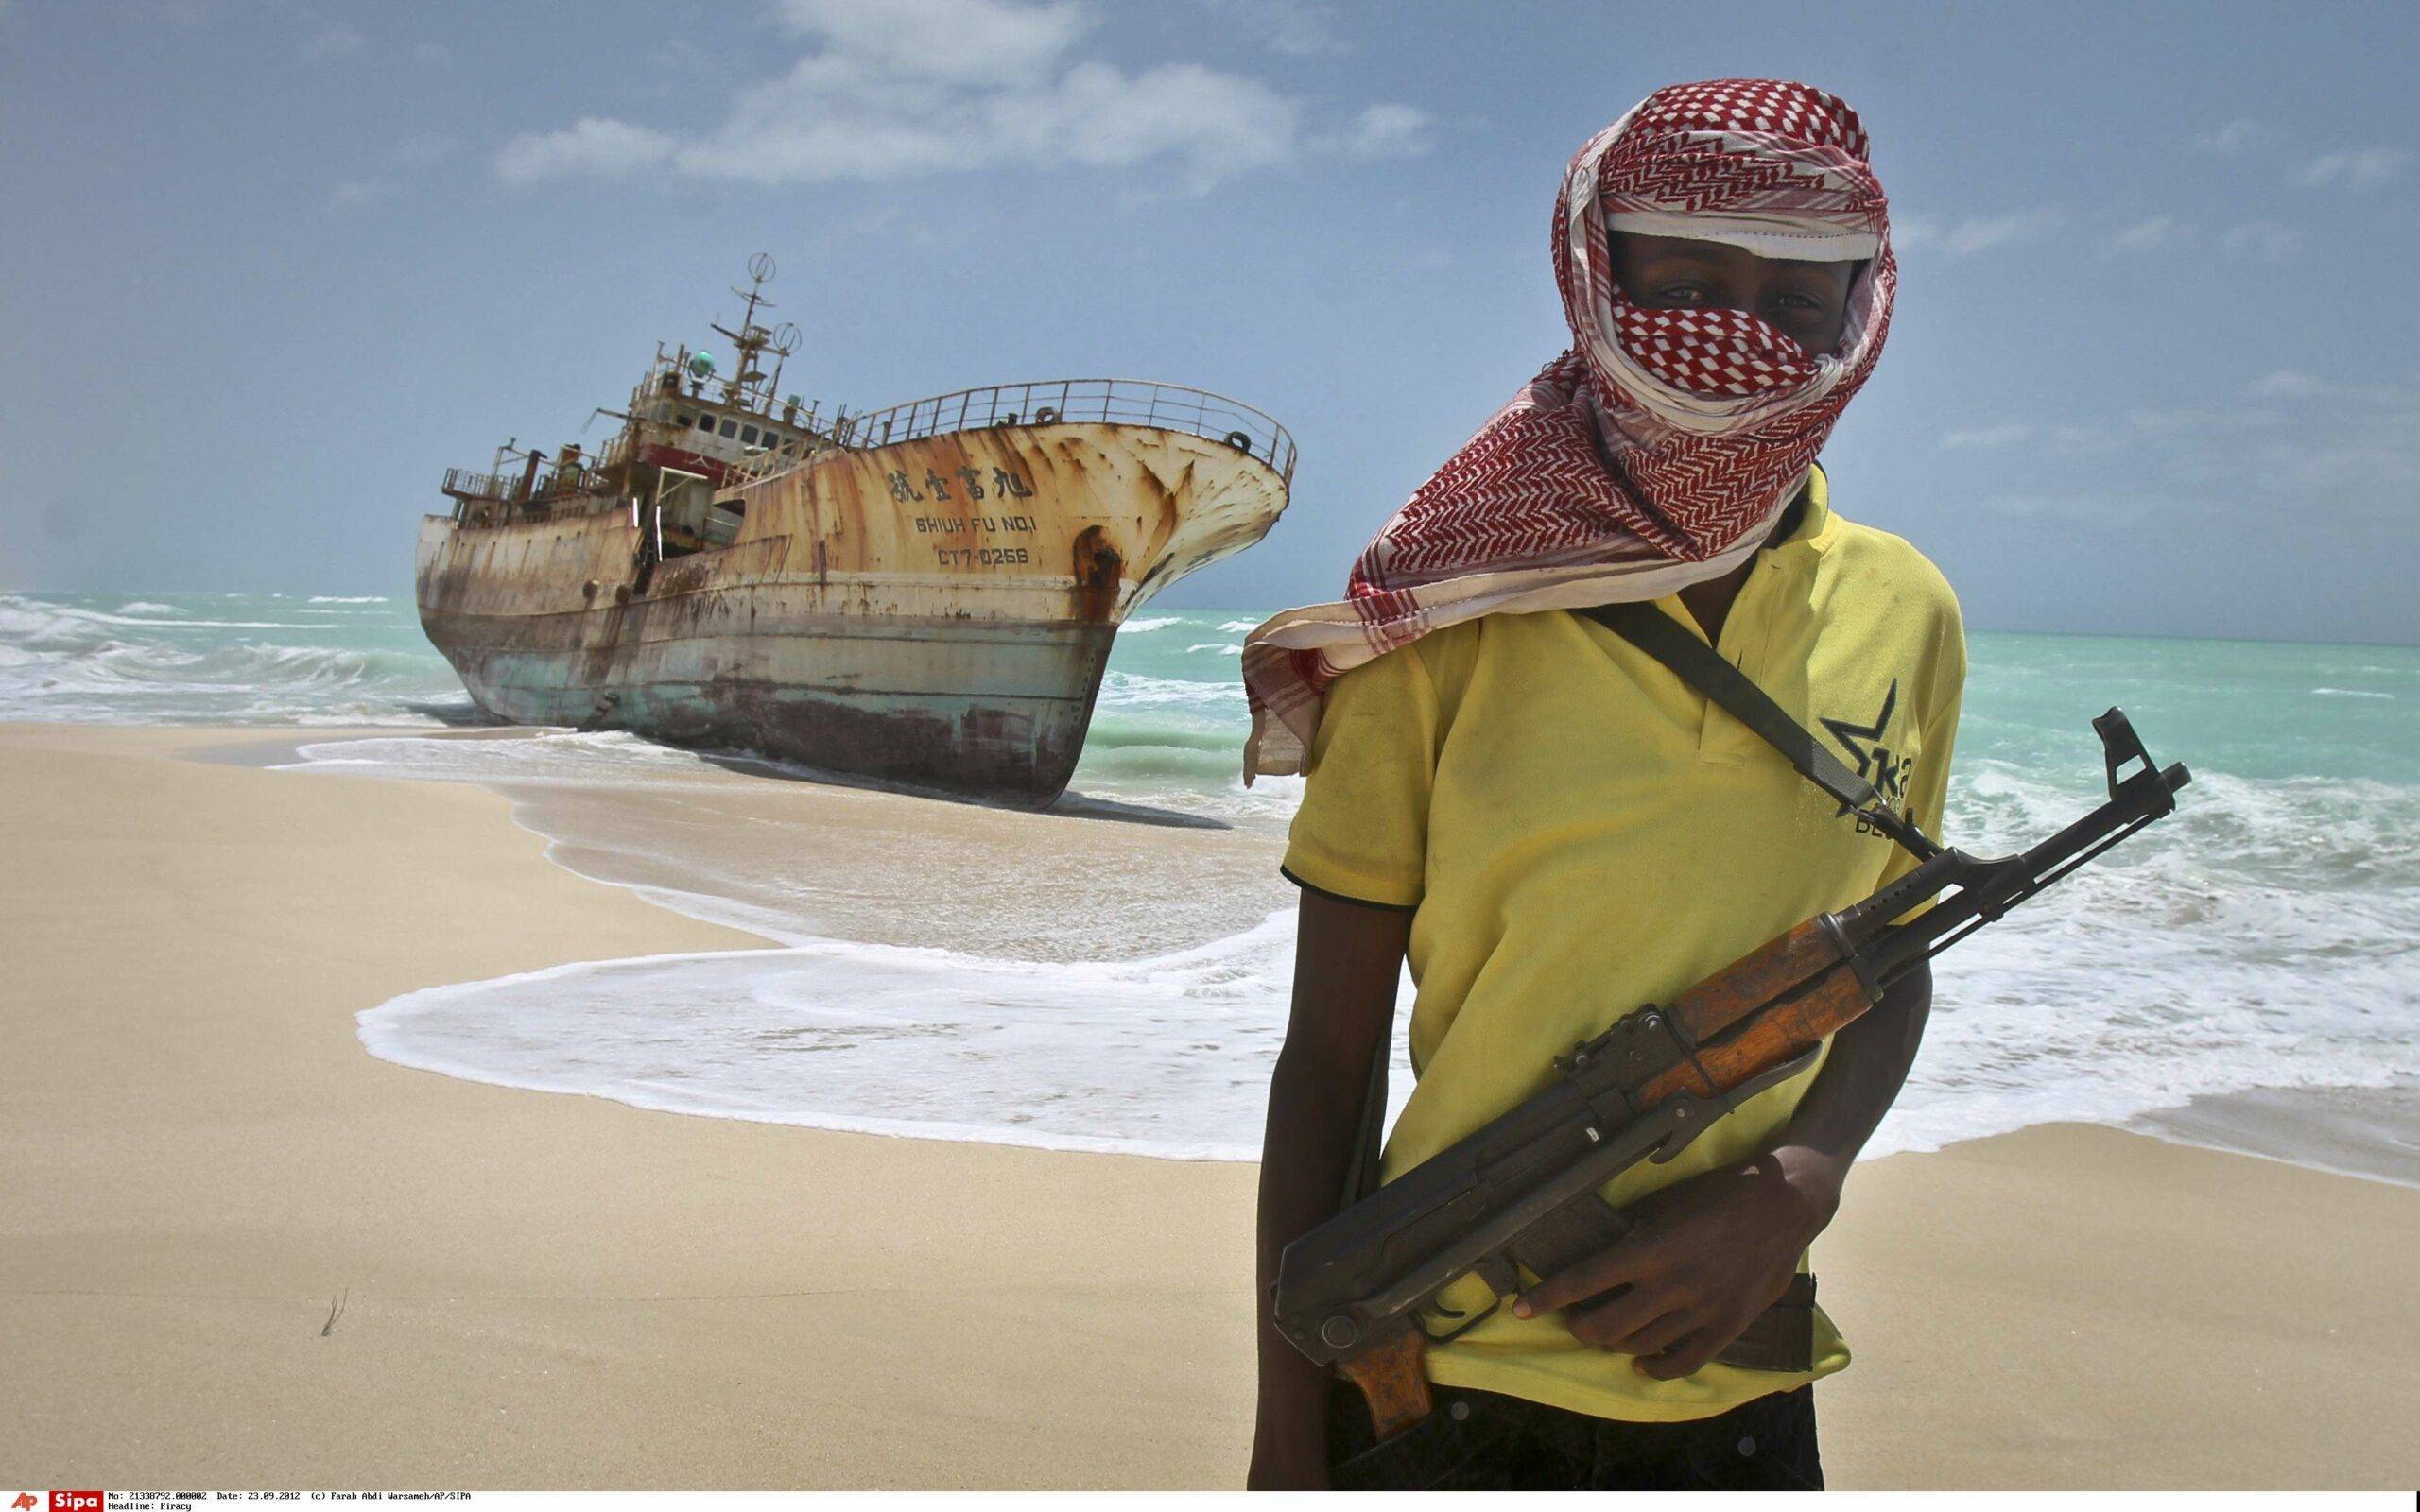 FILE - In this Sunday, Sept. 23, 2012 file photo, masked Somali pirate Hassan stands near a Taiwanese fishing vessel that washed up on shore after the pirates were paid a ransom and released the crew, in the once-bustling pirate den of Hobyo, Somalia. A U.K.-led Piracy Ransom Task Force says the shipping industry must adopt additional measures to ensure that payments aren't made to pirates after a successful attack. (AP Photo/Farah Abdi Warsameh, File)/NAI102/541753079361/SUNDAY, SEPT. 23, 2012 FILE PHOTO/1212121938